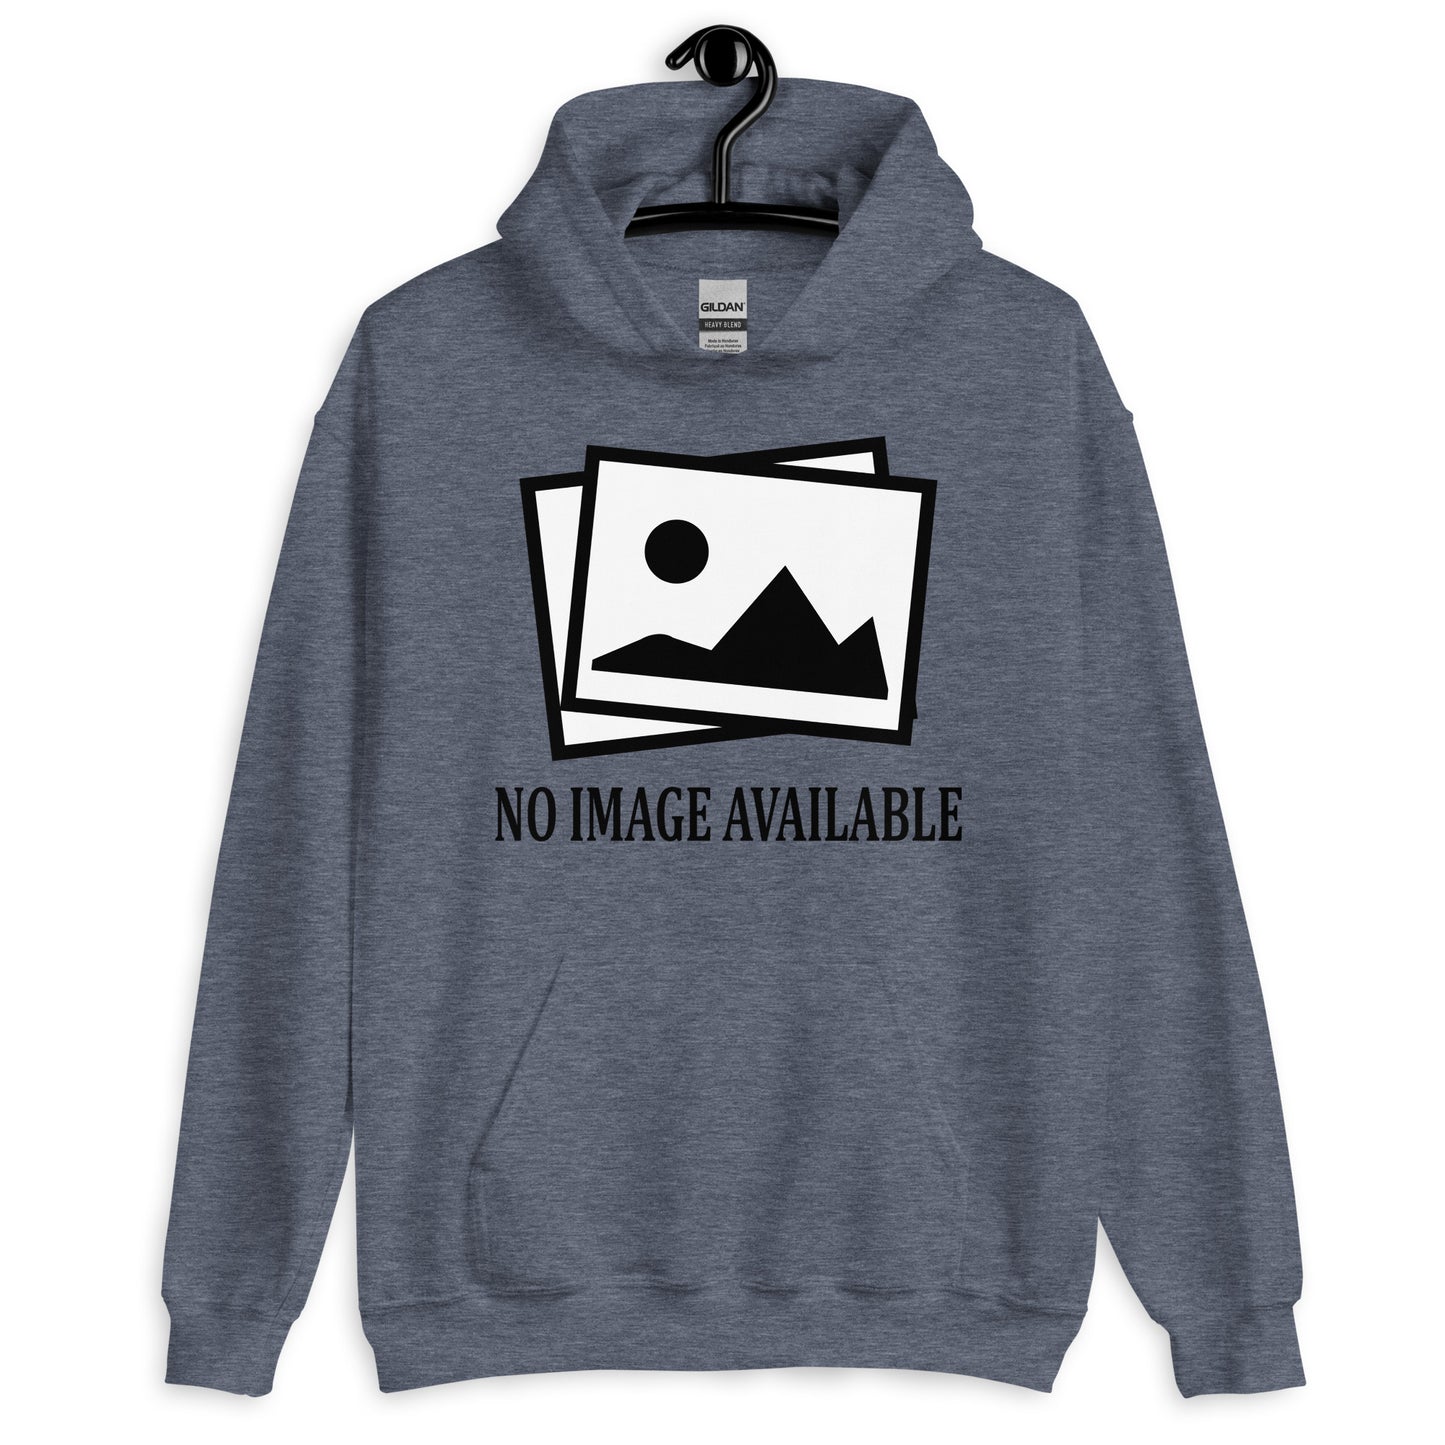 dark navy blue hoodie with image and text "no image available"